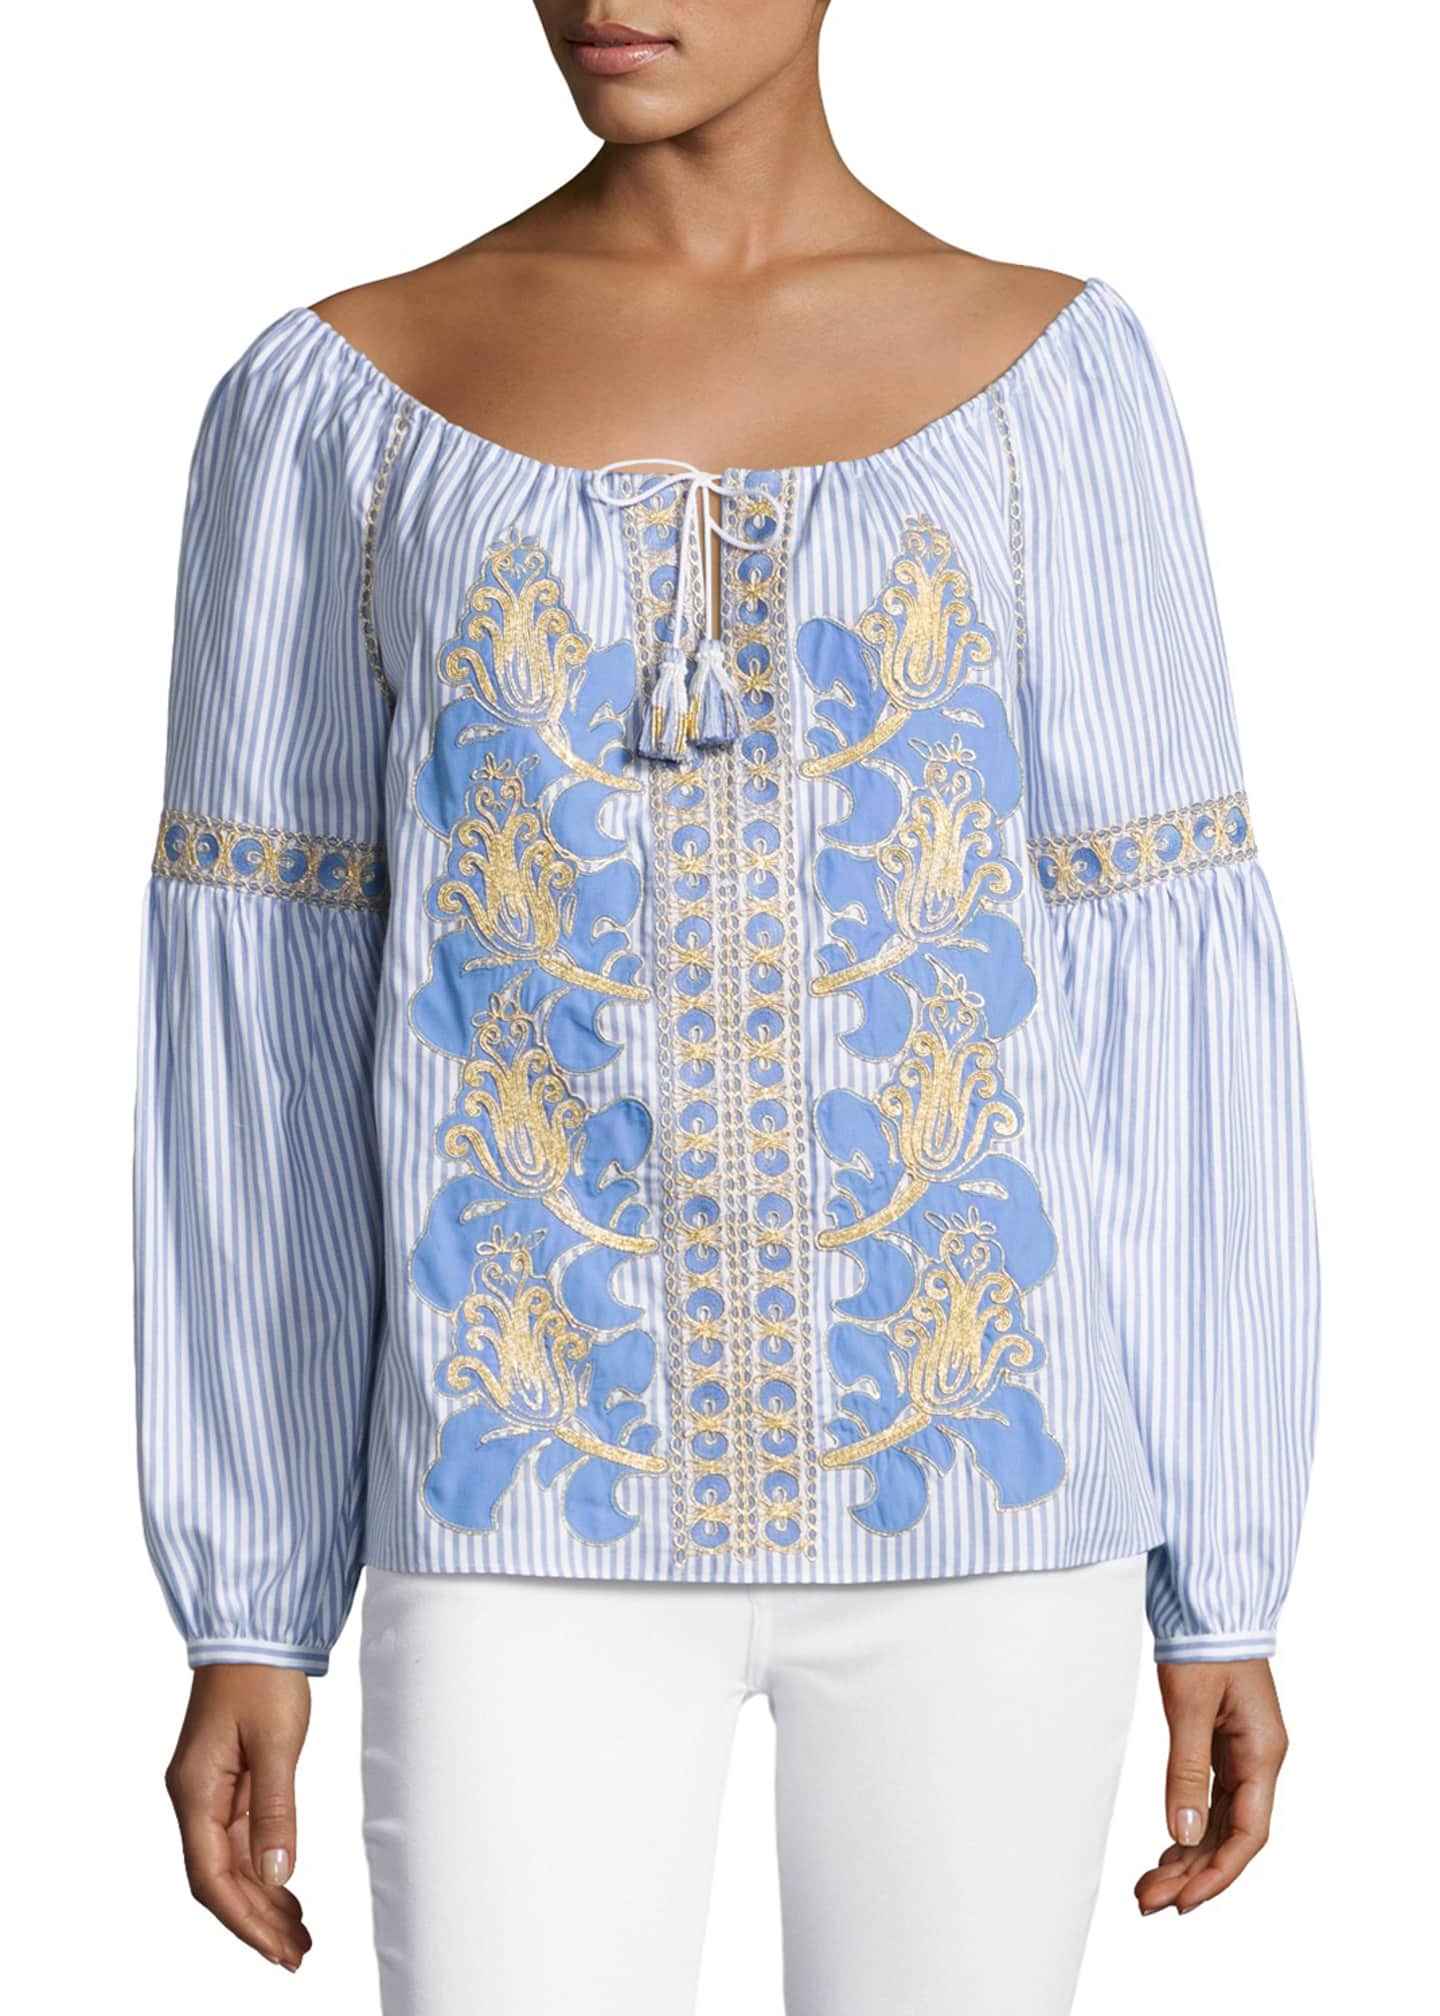 Tory Burch Embroidered Seersucker Peasant Blouse, White Image 1 of 3